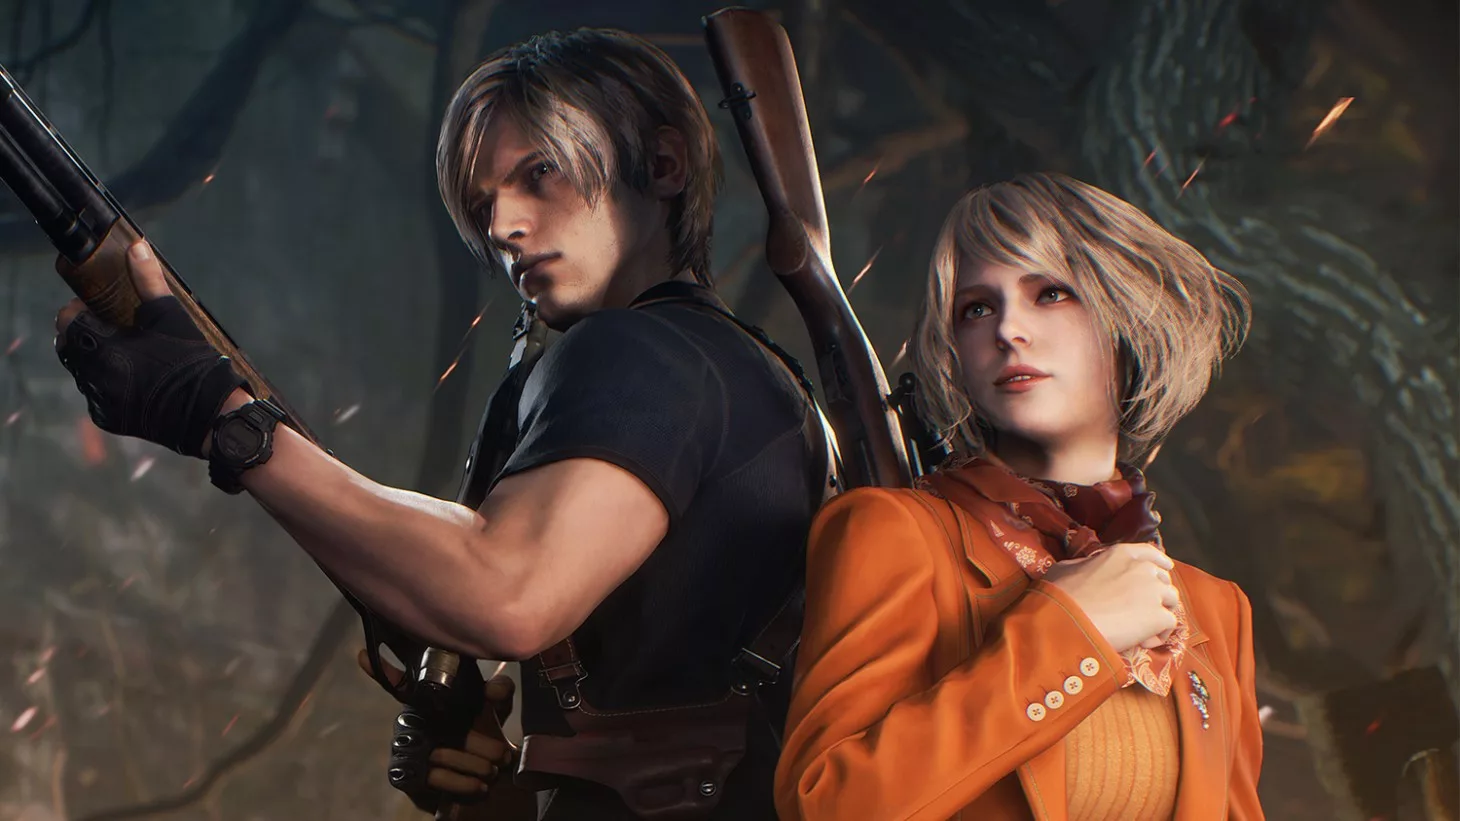 Resident Evil 4 Remake To Lock Some of the Treasures in DLC